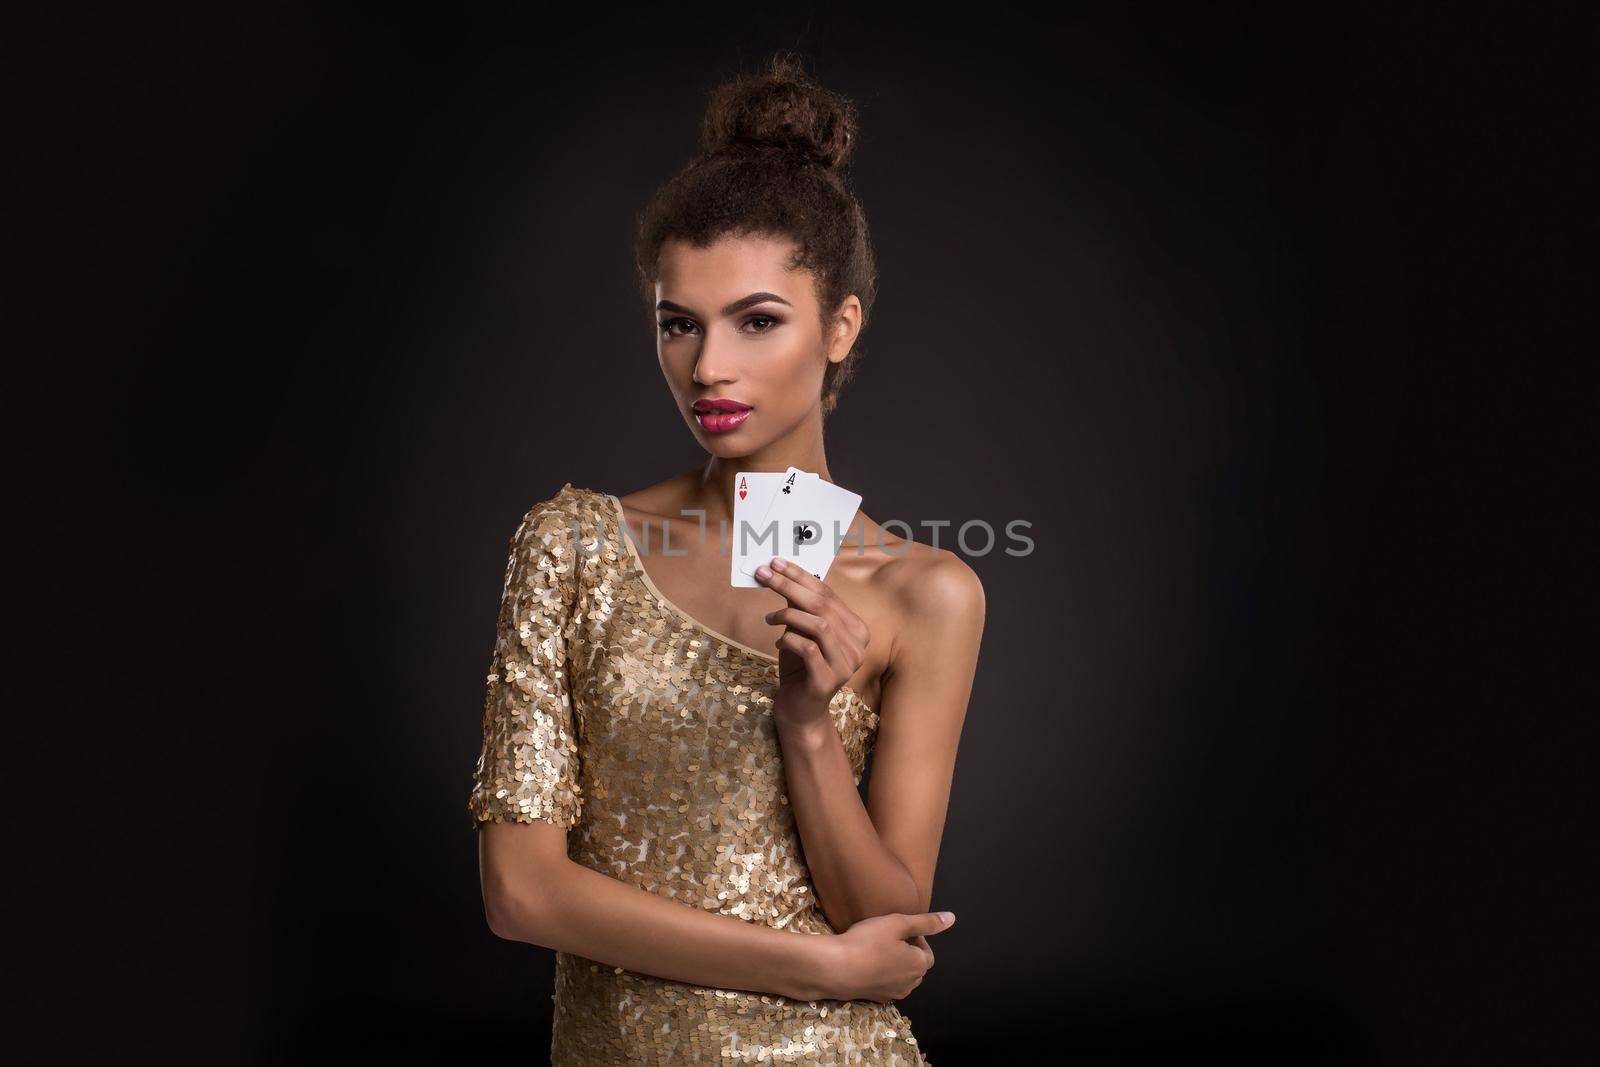 Woman winning - Young woman in a classy gold dress holding two aces, a poker of aces card combination. by nazarovsergey